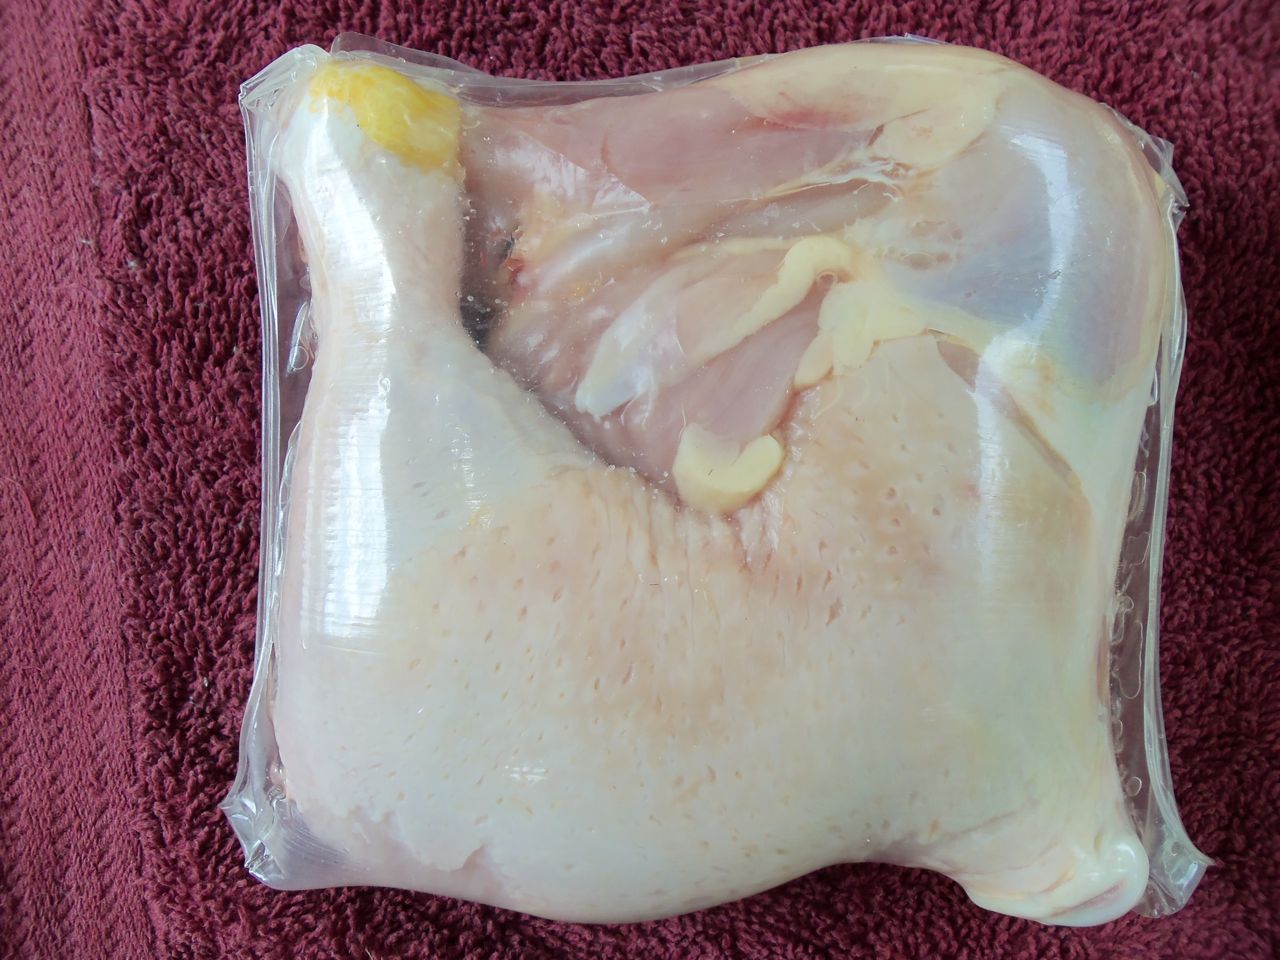 Poultry Shrink Bags: Why You Should Use Them - A Farmish Kind of Life